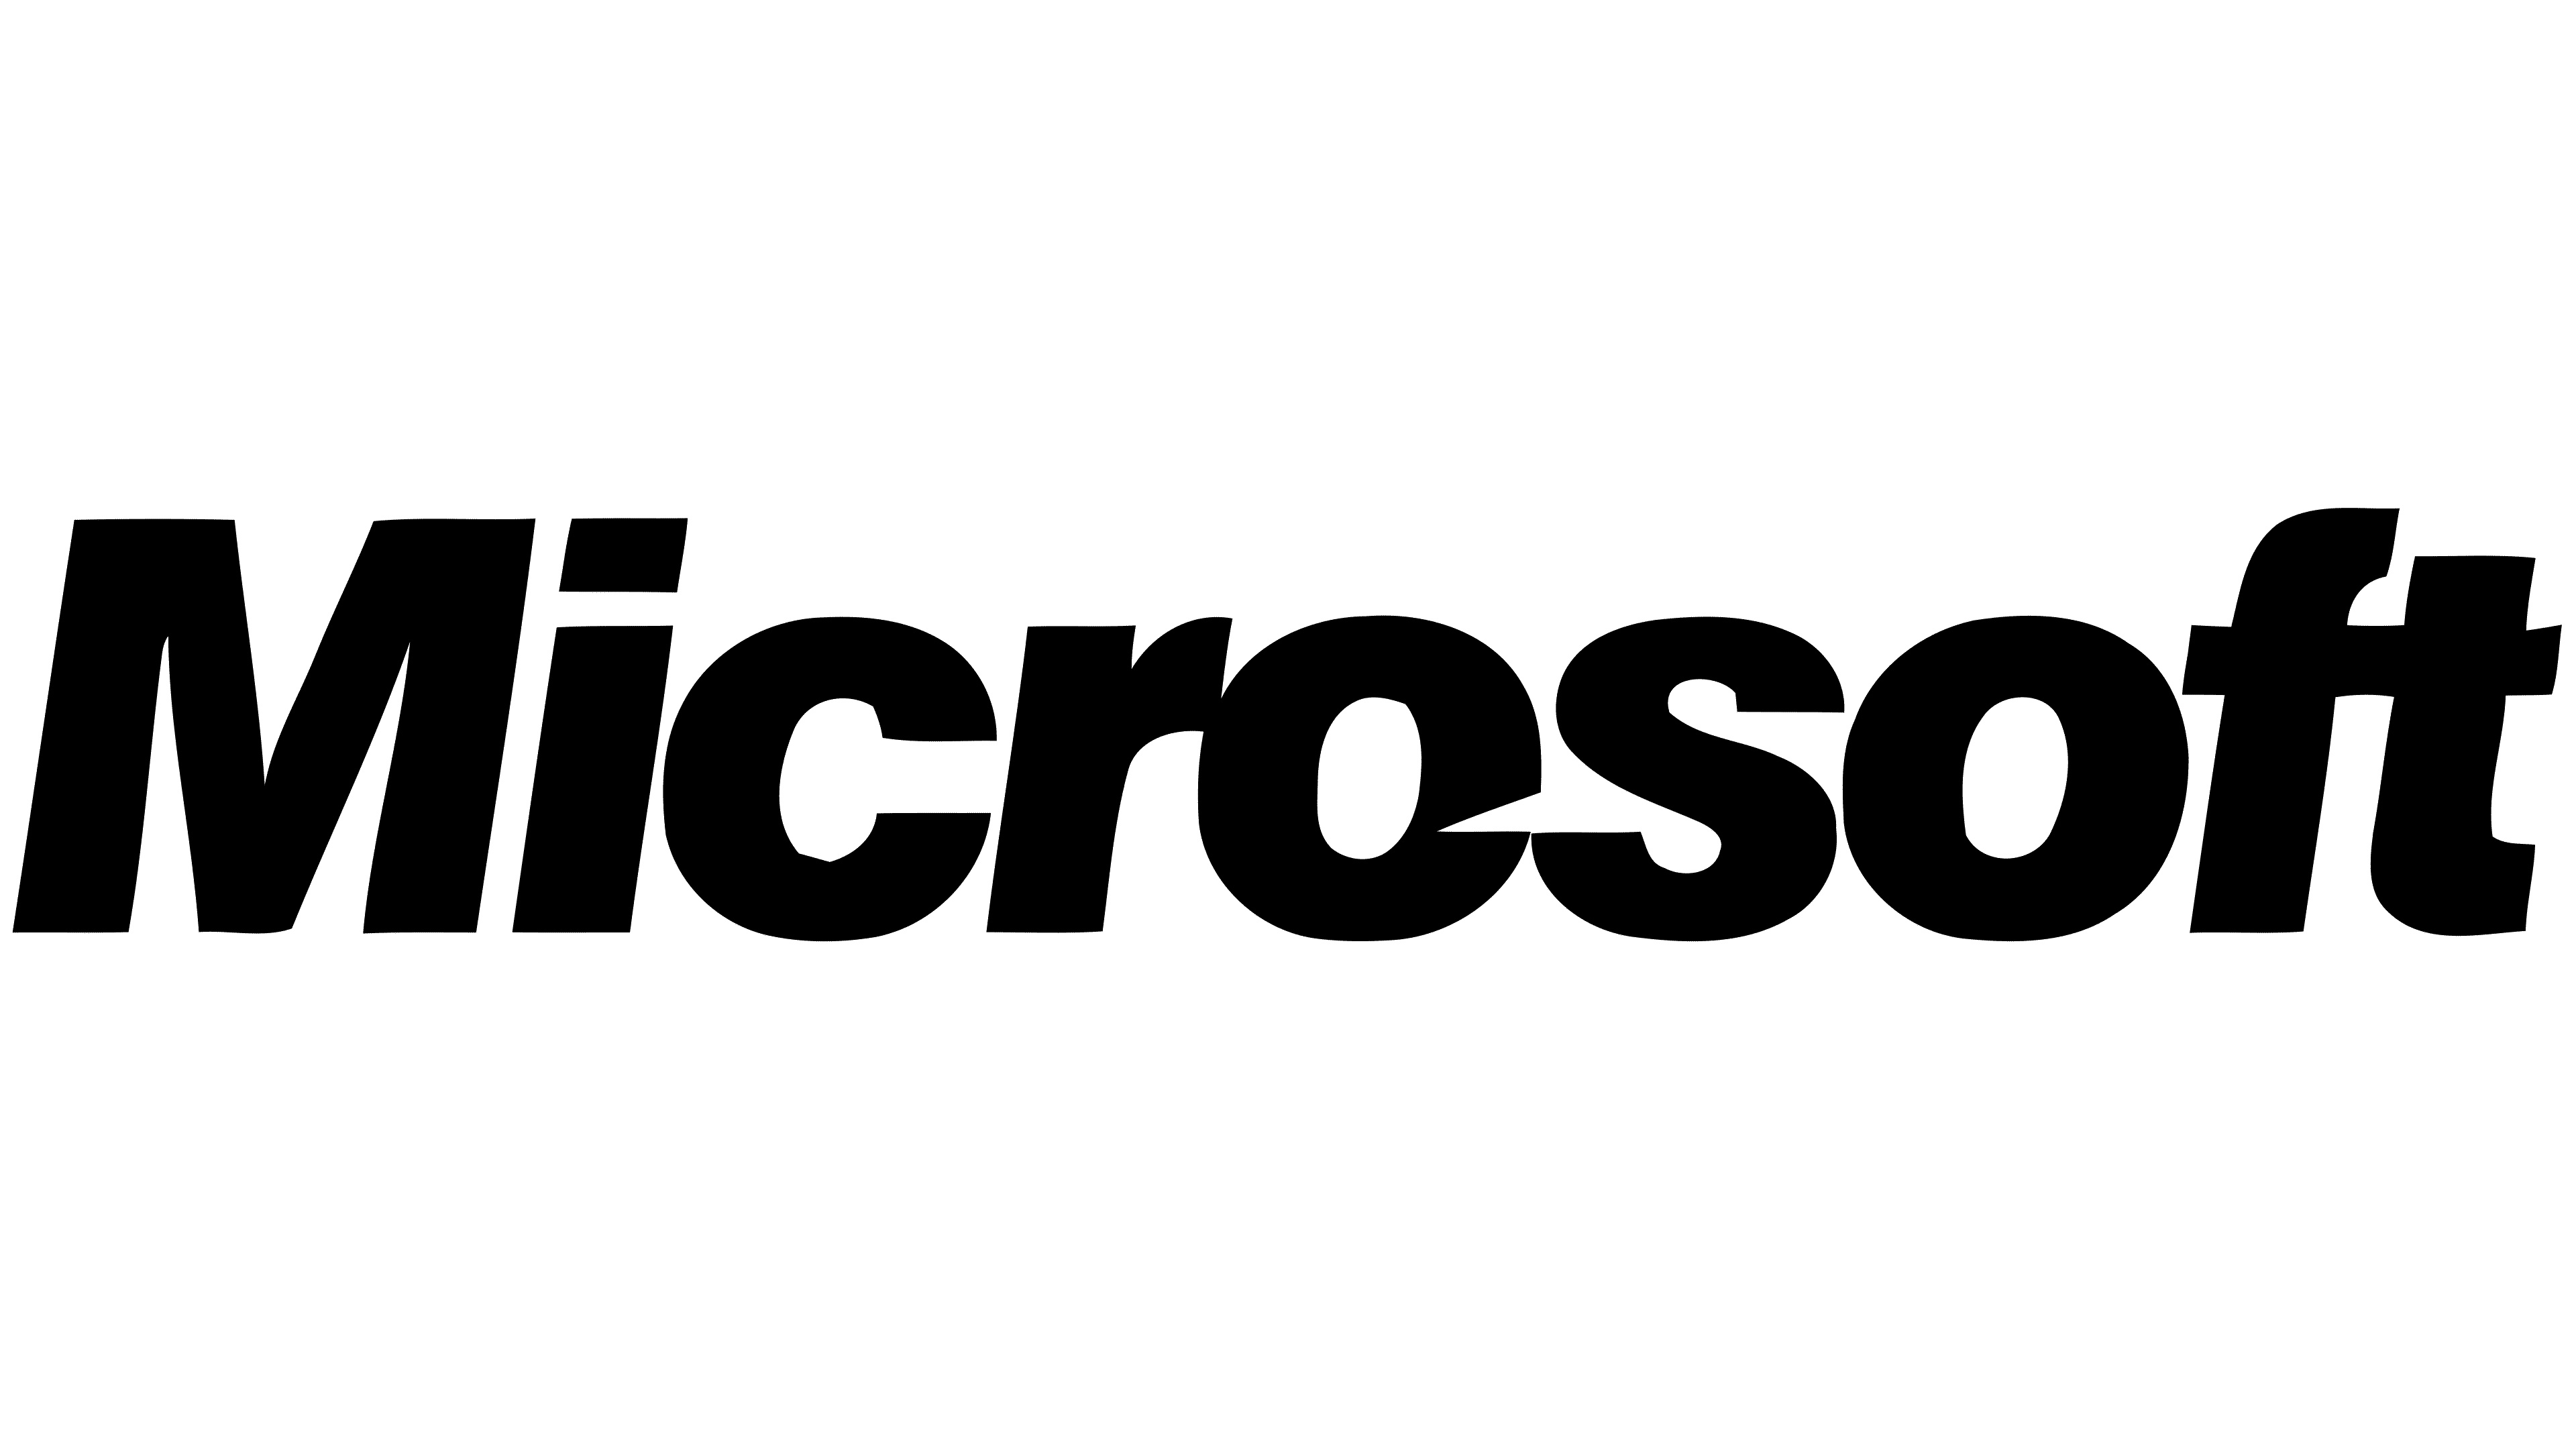 Microsoft: Bill Gates introduced the first version of Microsoft Windows in 1983. 3840x2160 4K Wallpaper.